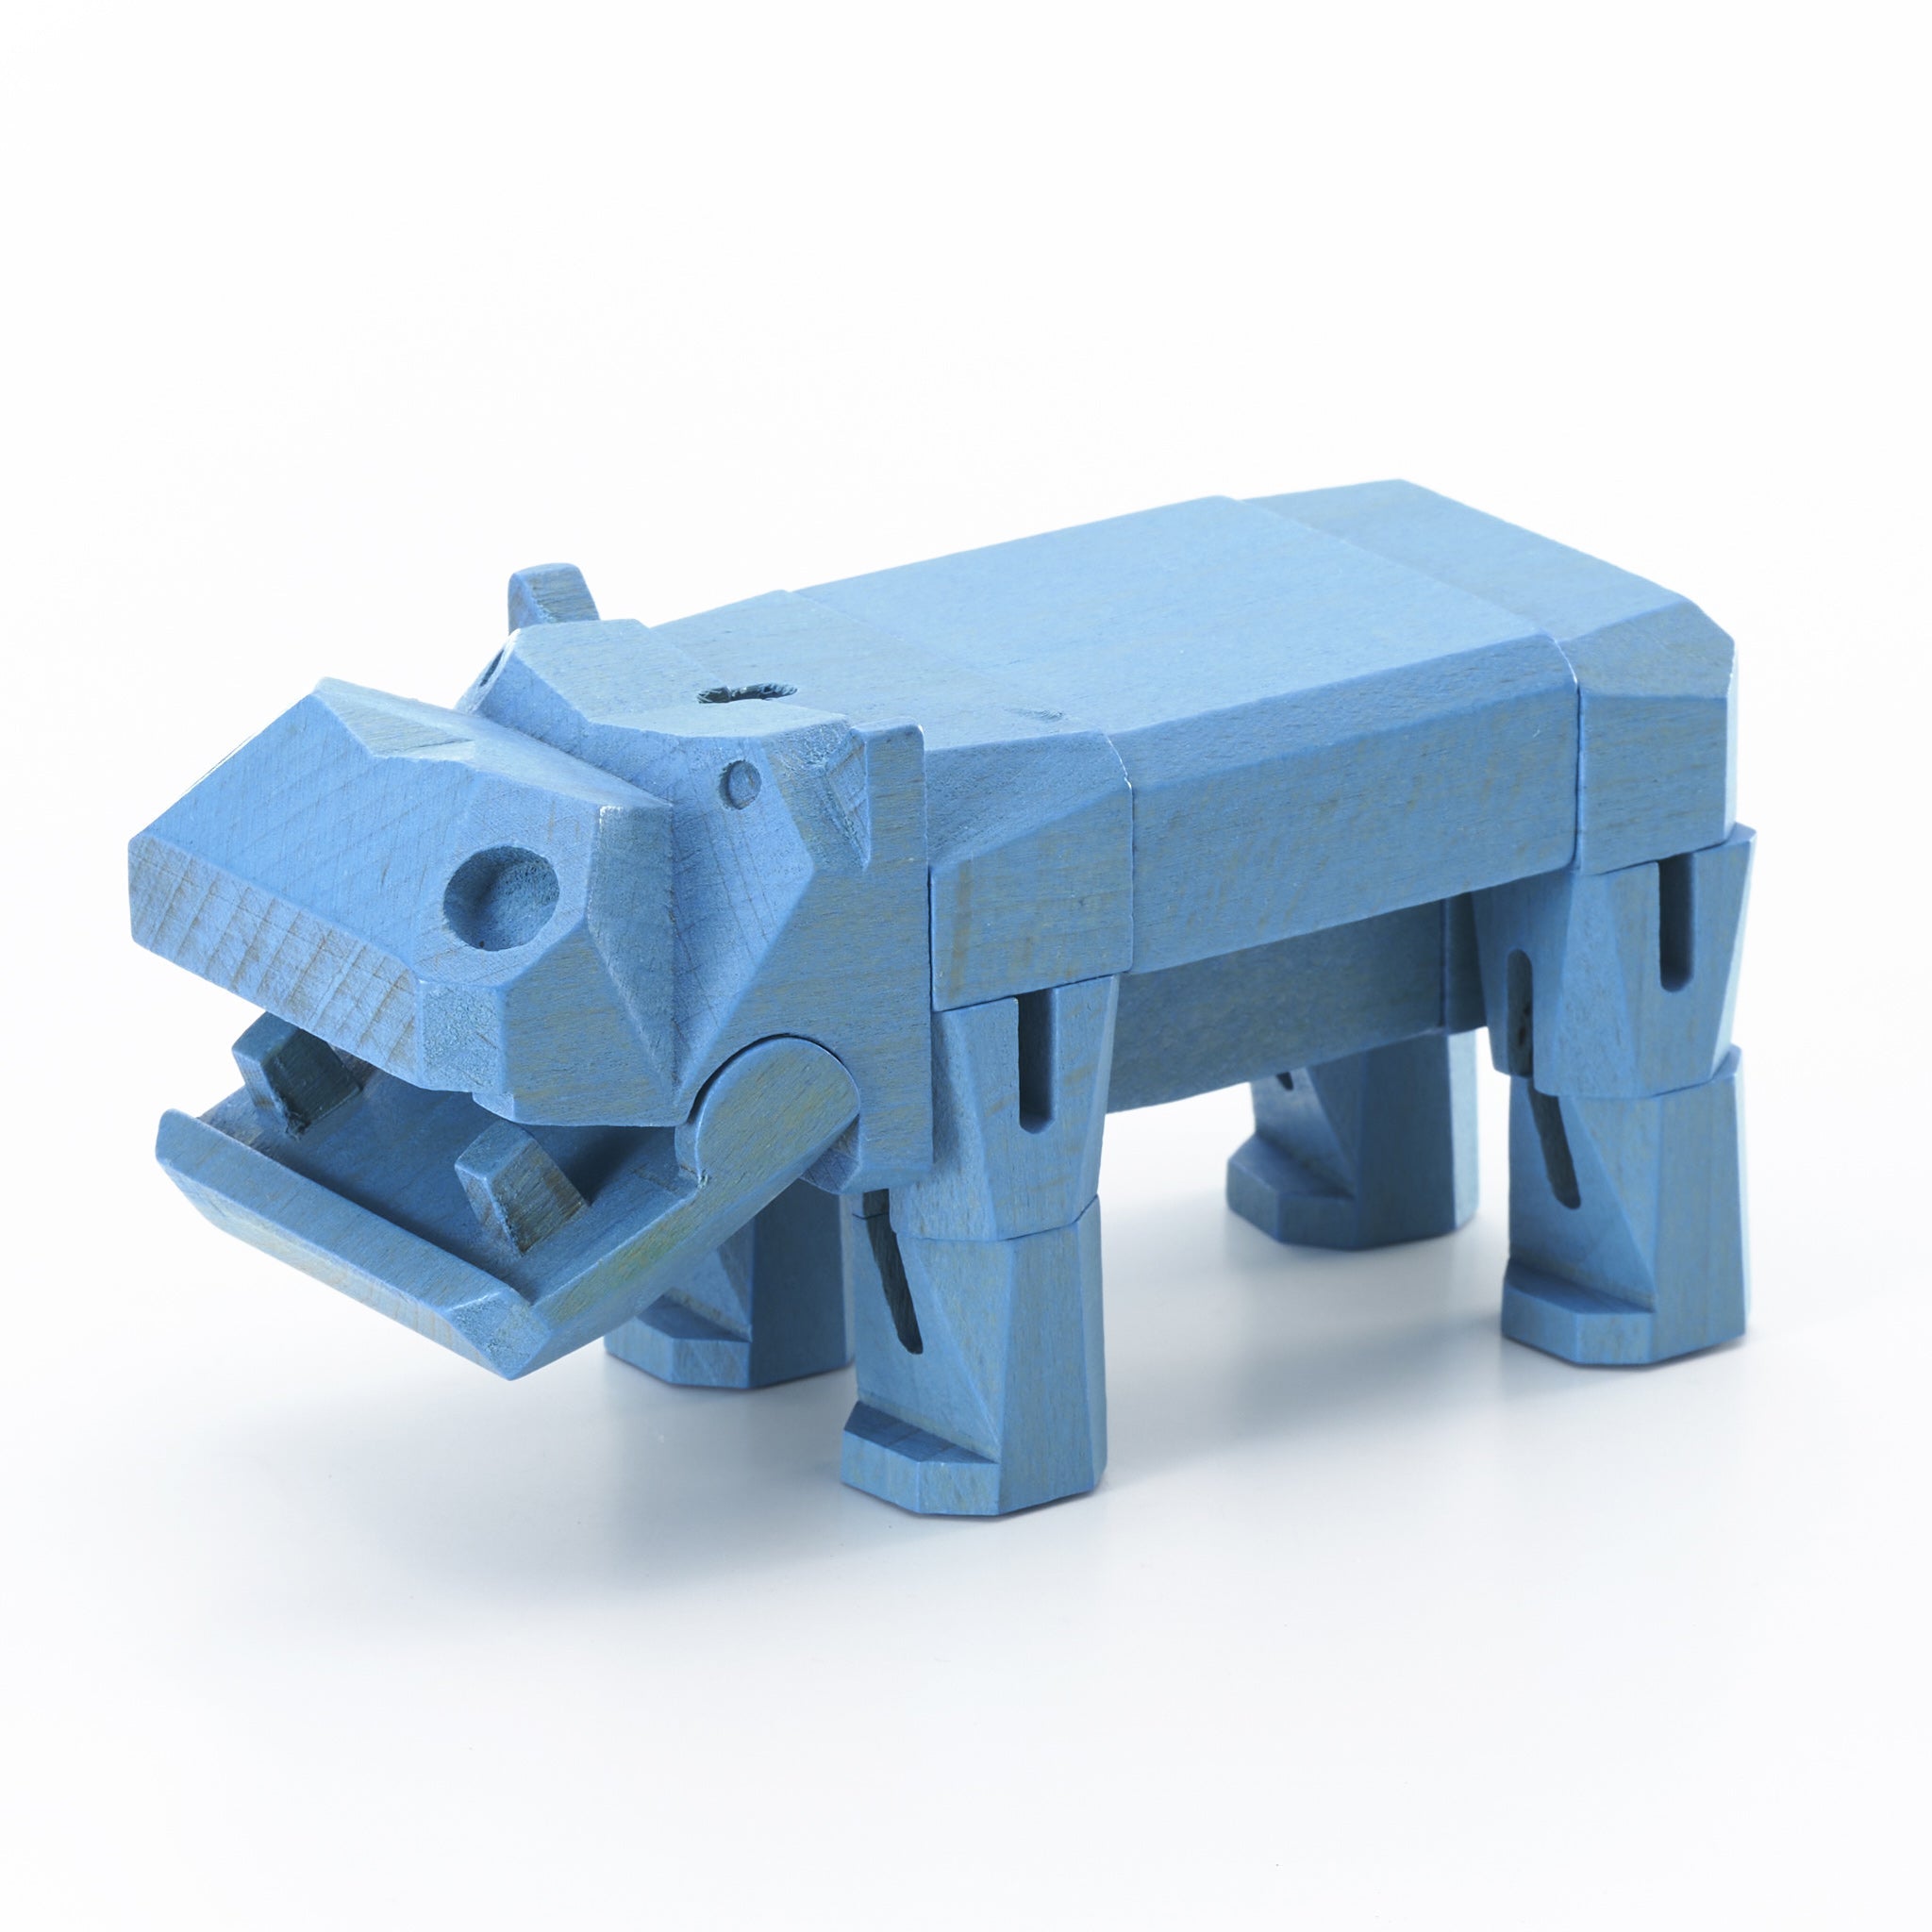 Morphits ® Hippo Wooden Toy: Explore the Wild with Poseable Wooden Playset Friends - Yoshiaki Ito Design Stand B1